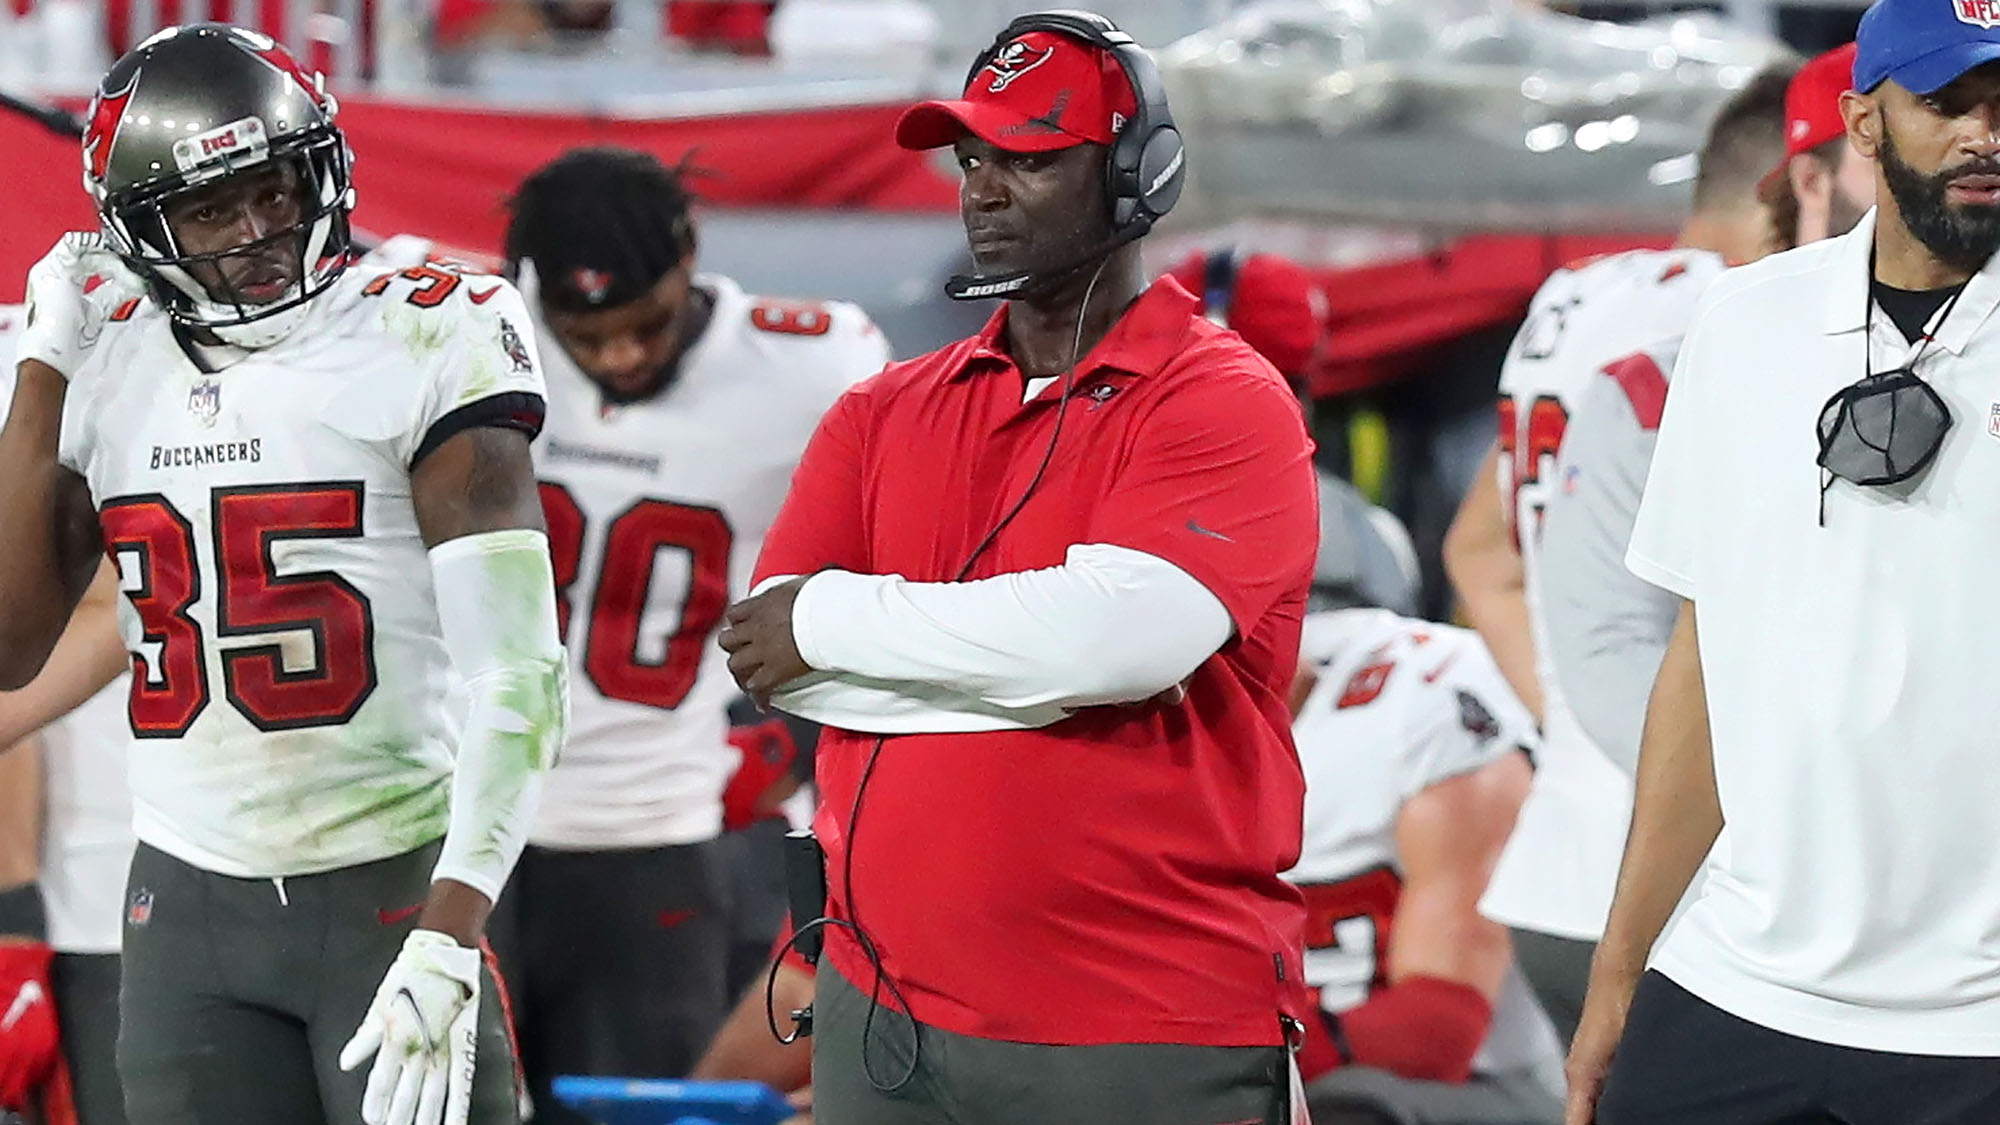 Todd Bowles gets first post-Jets head coaching opportunity with Bucs